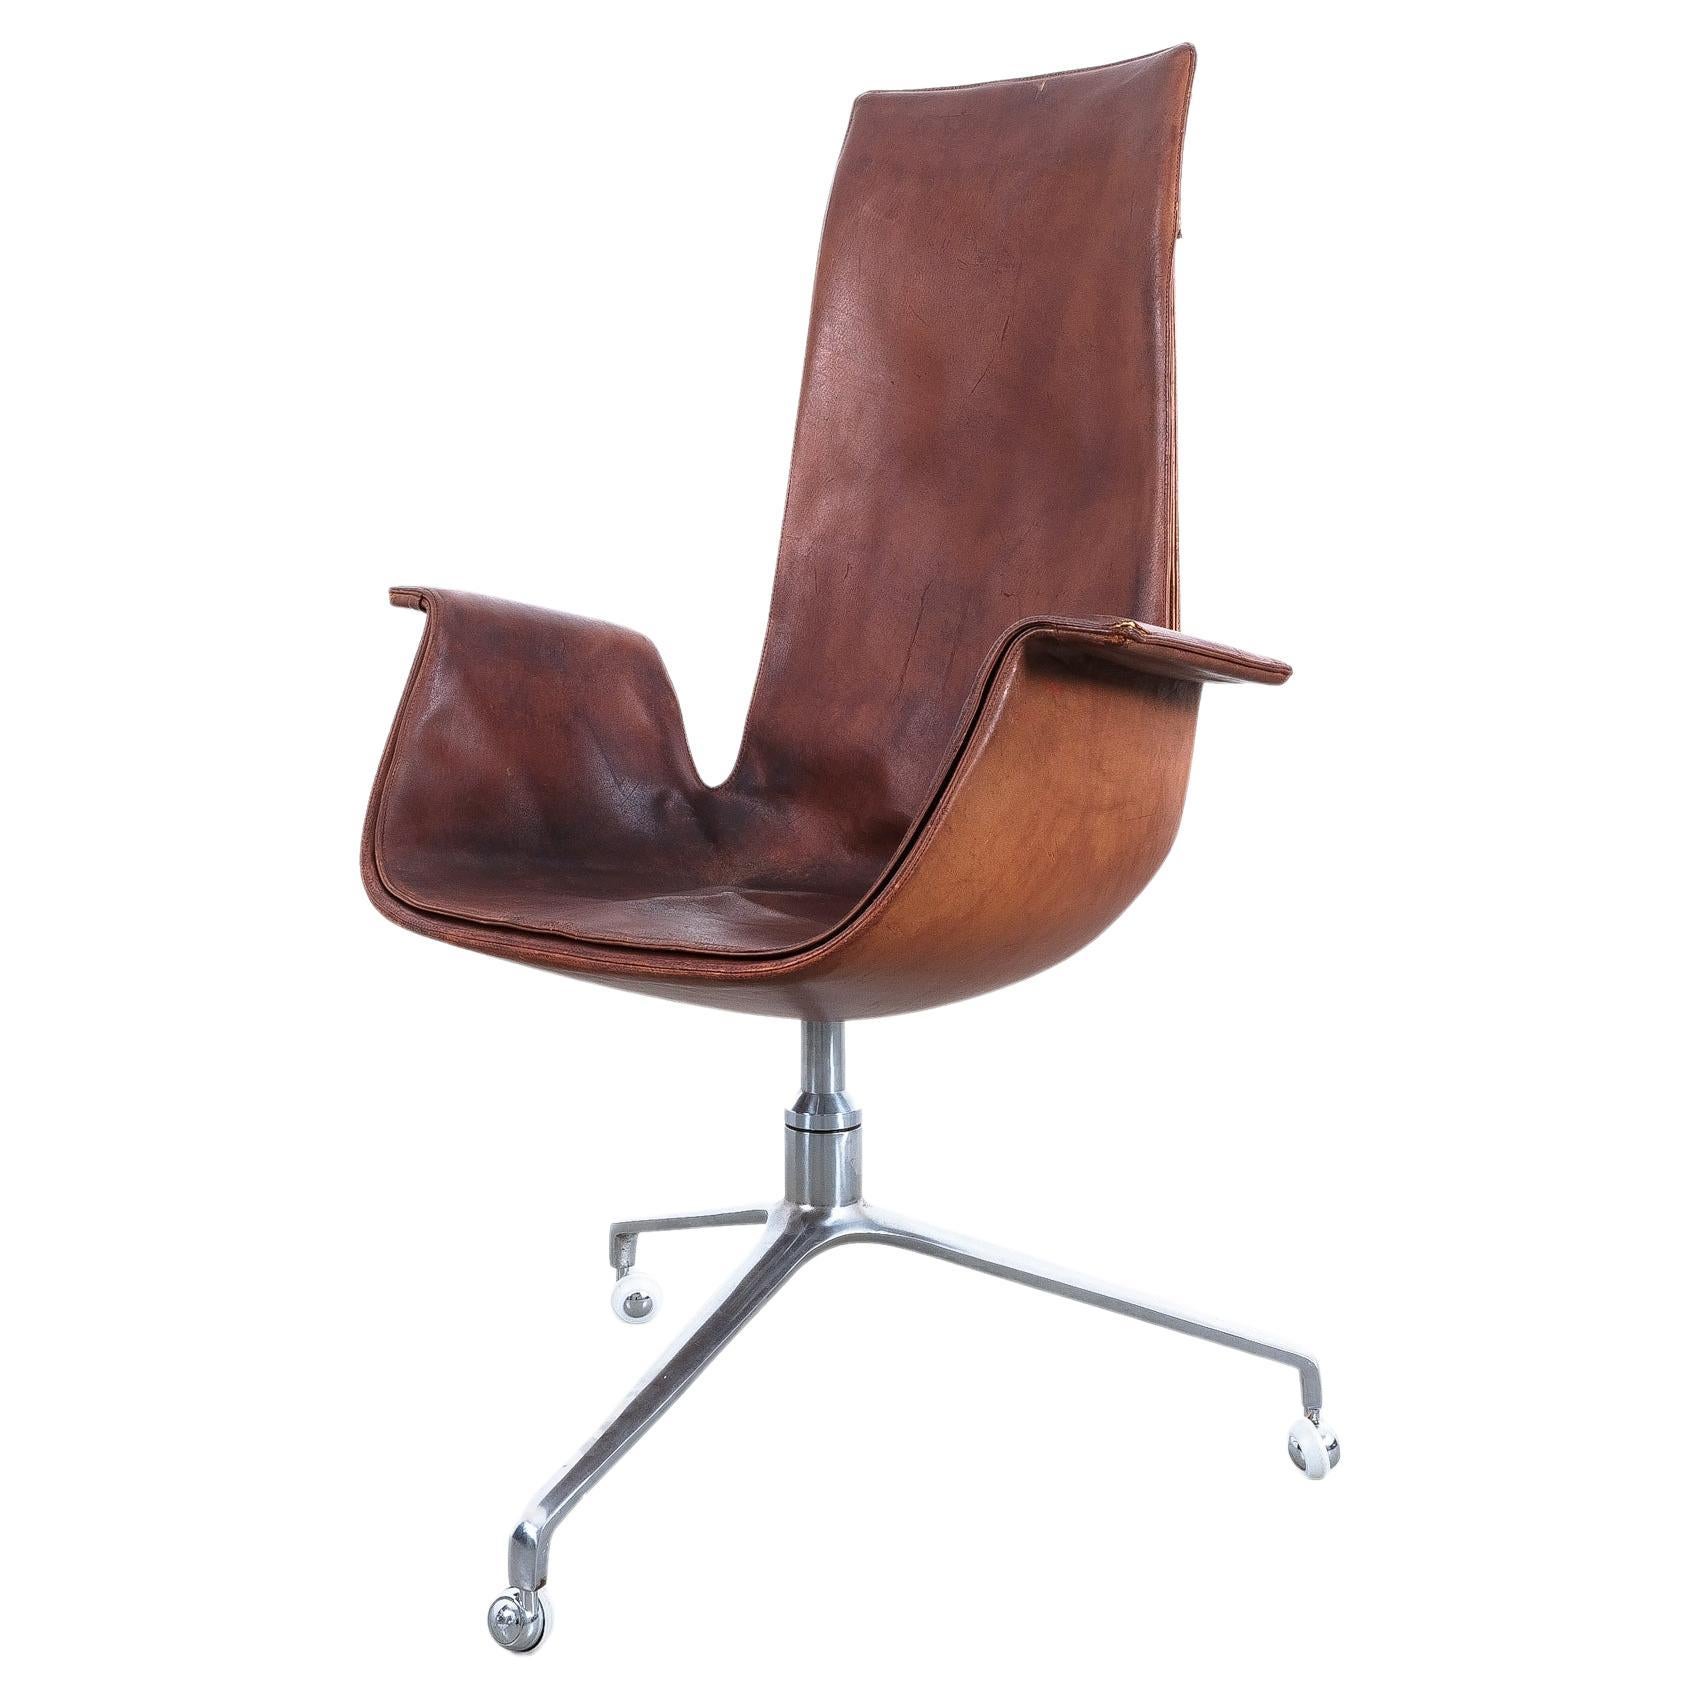 FK 6725 Fabricius and Kastholm Brown Leather High Back Bird Desk Chair, 1964